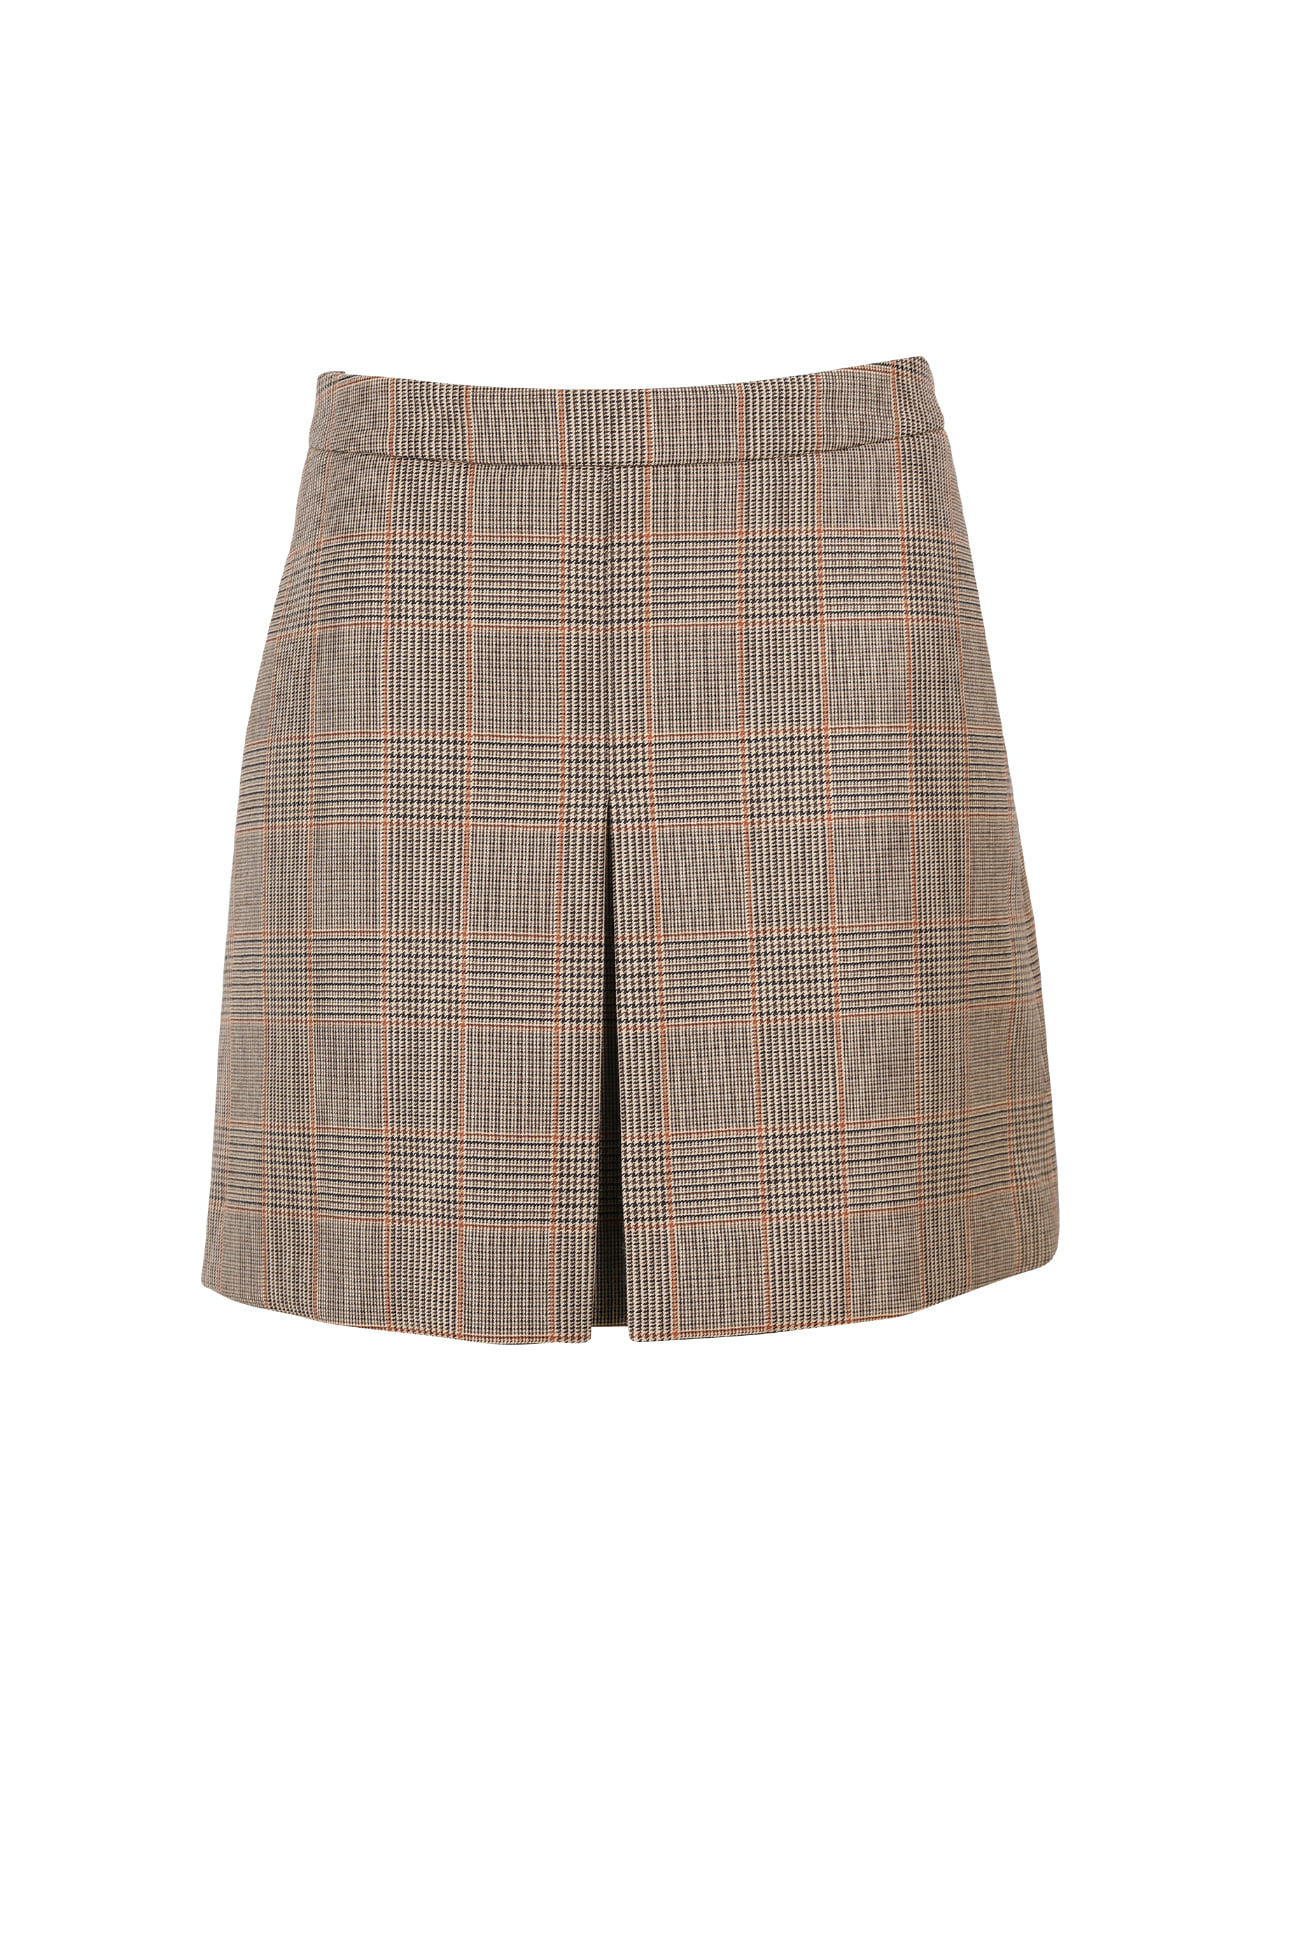 HIGH QUALITY LINE - Classic Moon Tweed Wool Skirt (Fabric by Abraham Moon, Made in ENGLAND)